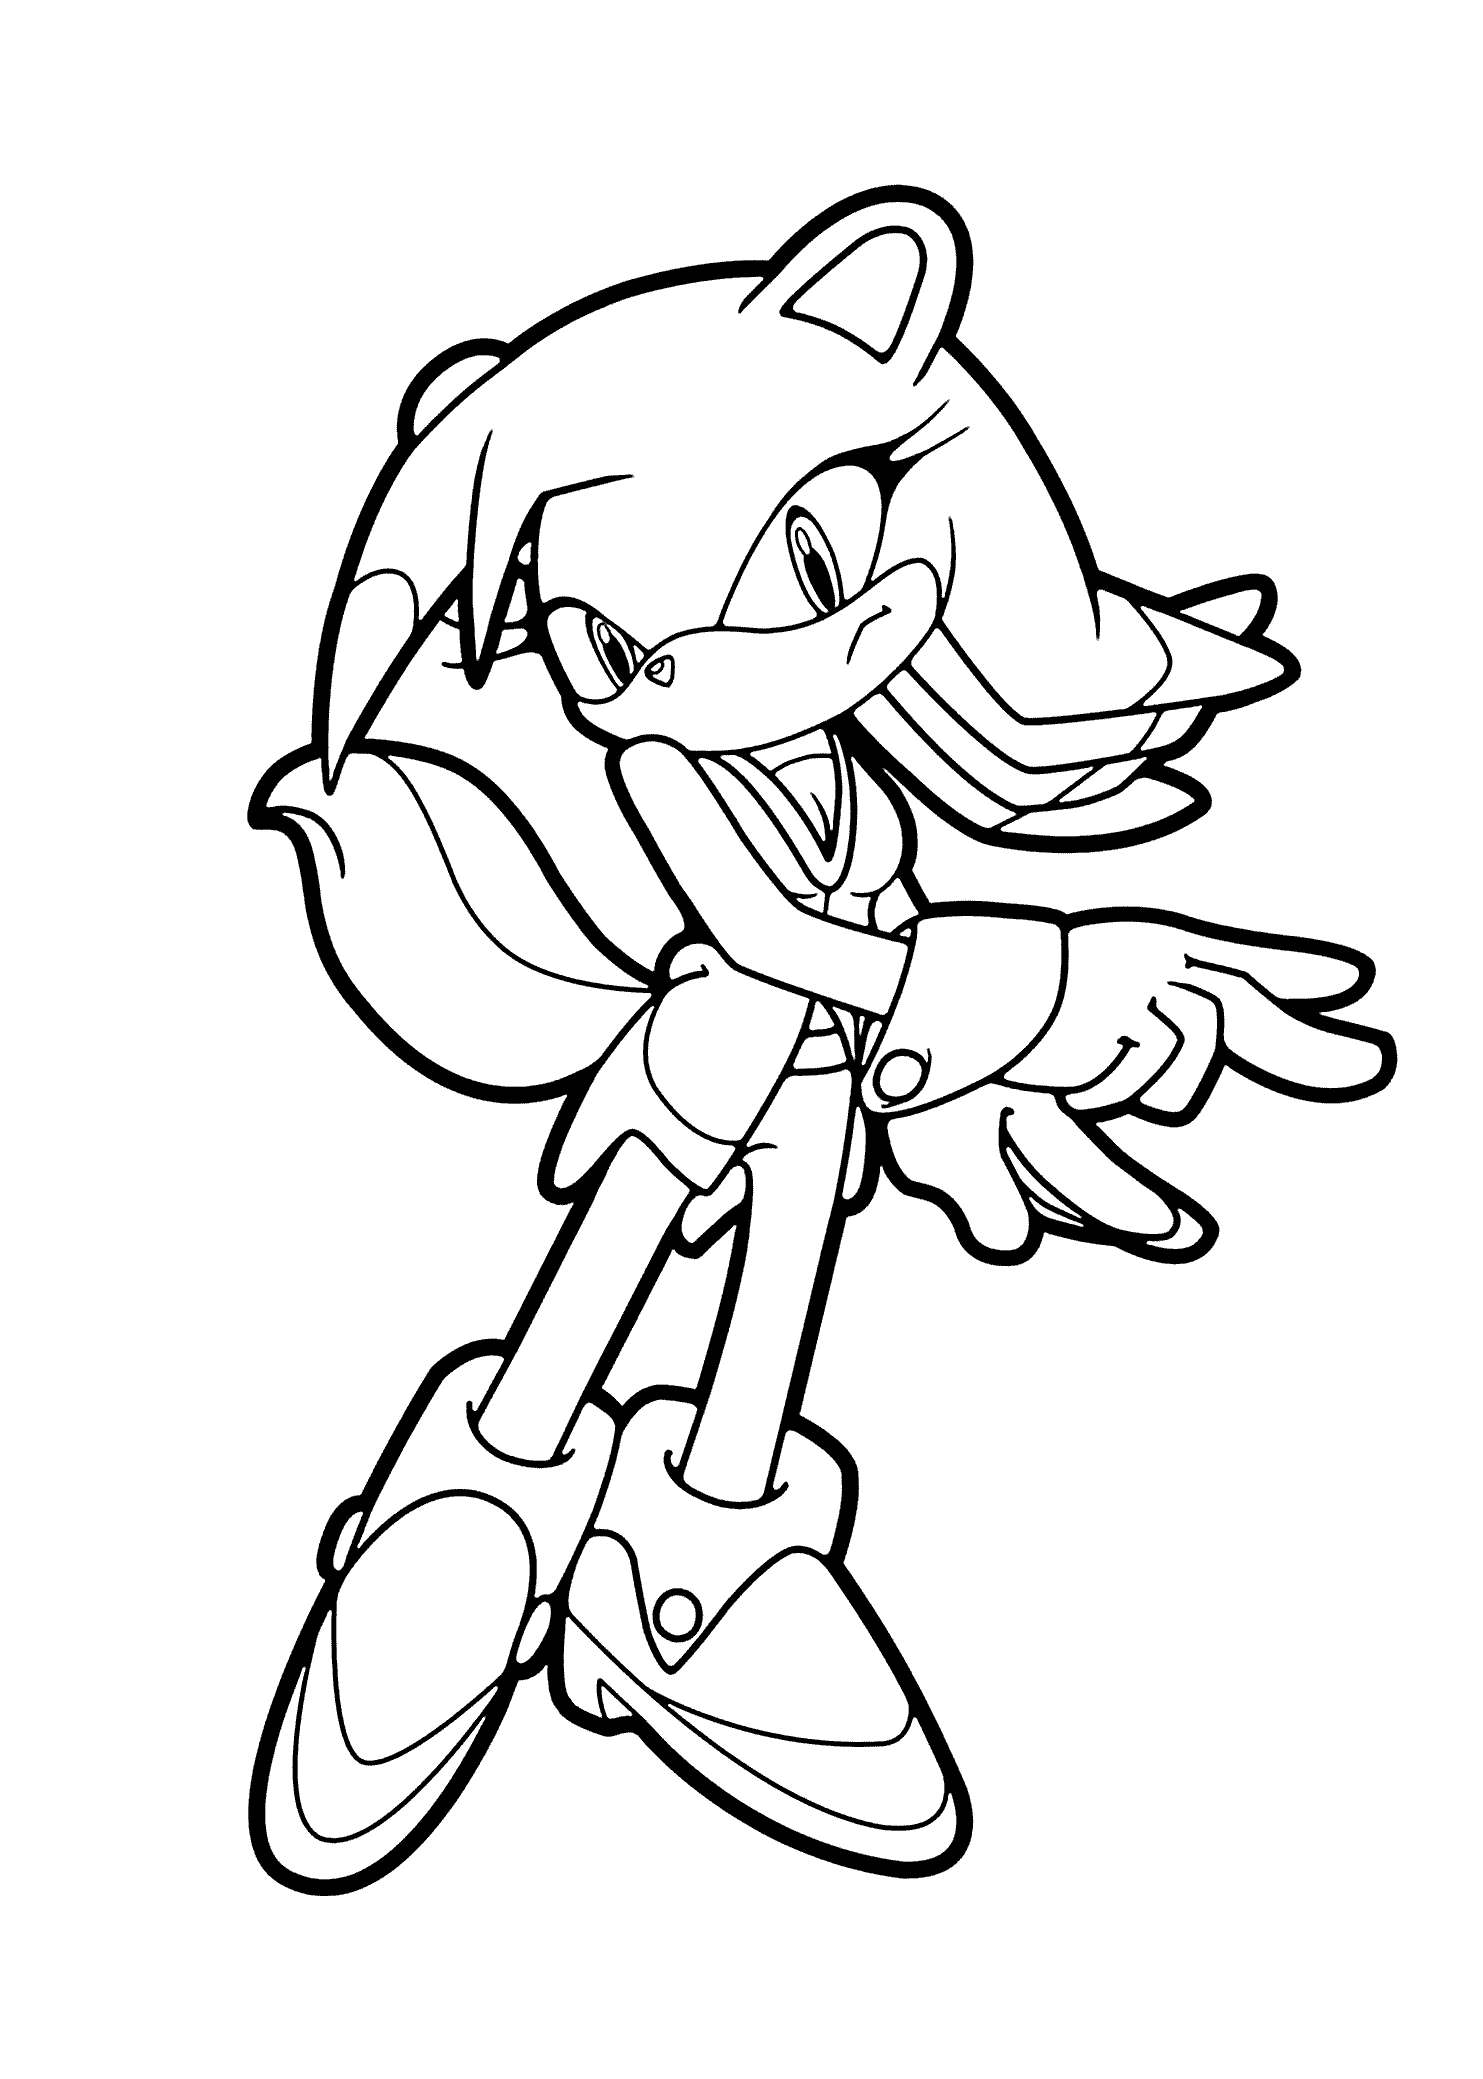 Sonic characters coloring pages for kids, printable free Cartoon